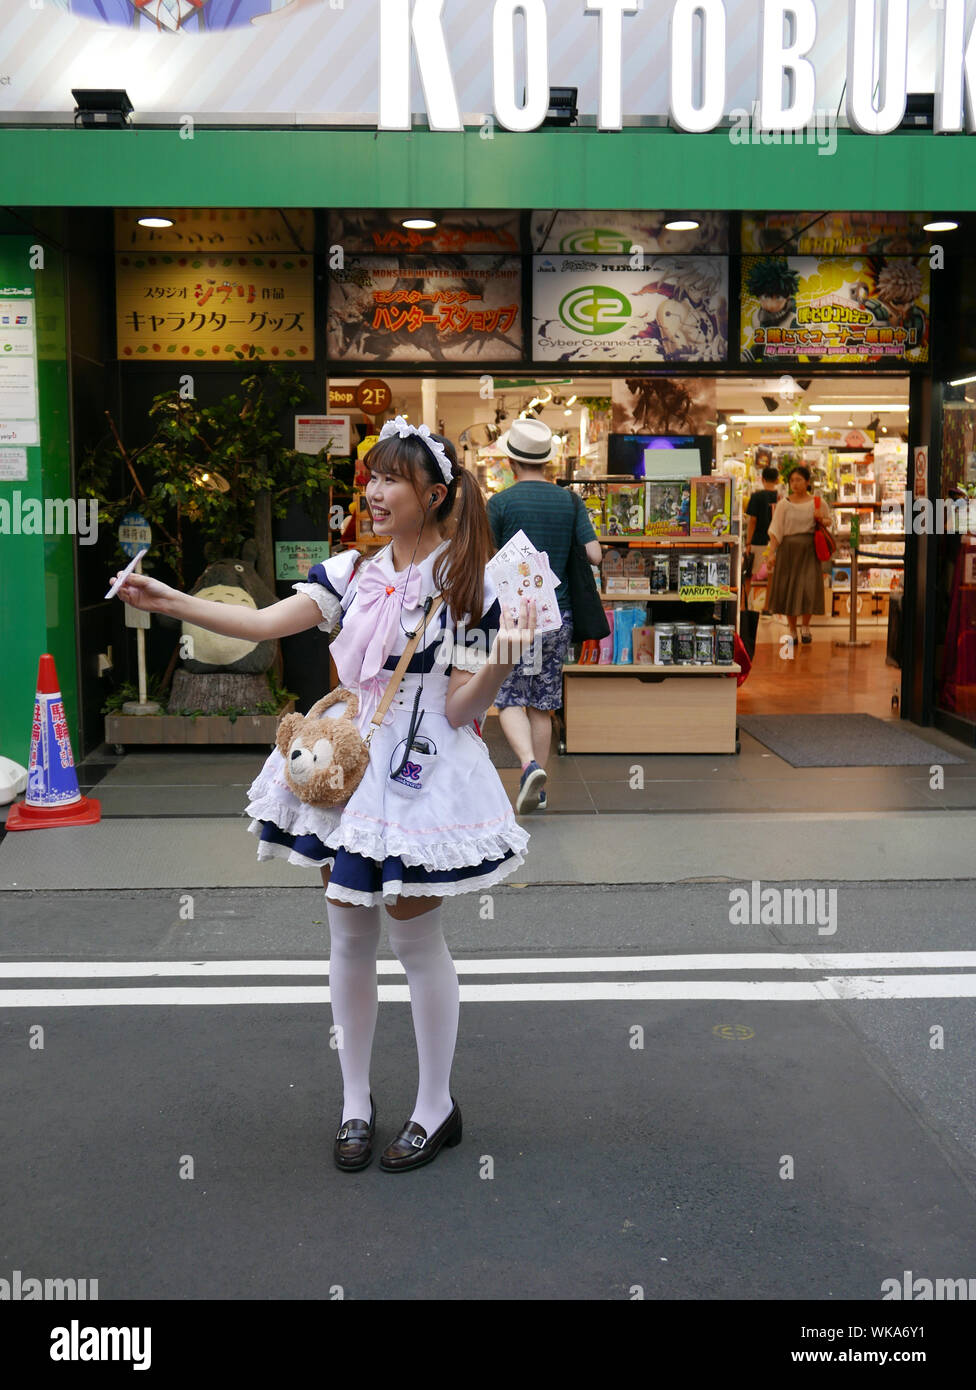 JAPAN - photo by Sean Sprague  Akihabara, Tokyo, by night. Prostitutes dressed as maids or other costumes. 'cos play'. Stock Photo